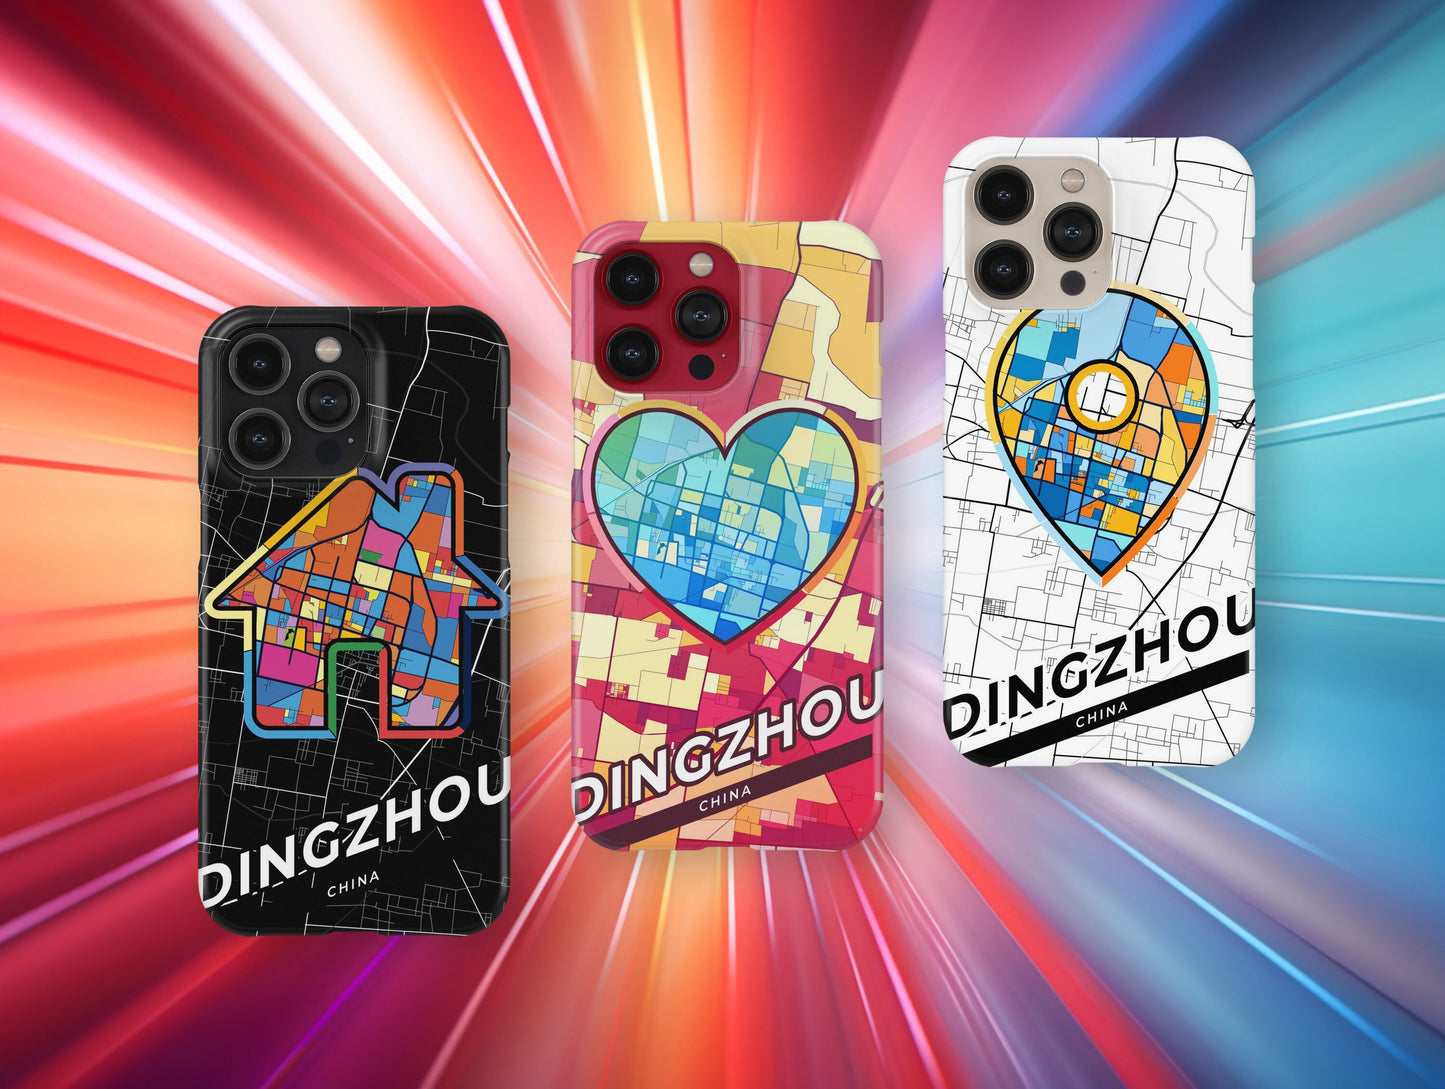 Dingzhou China slim phone case with colorful icon. Birthday, wedding or housewarming gift. Couple match cases.